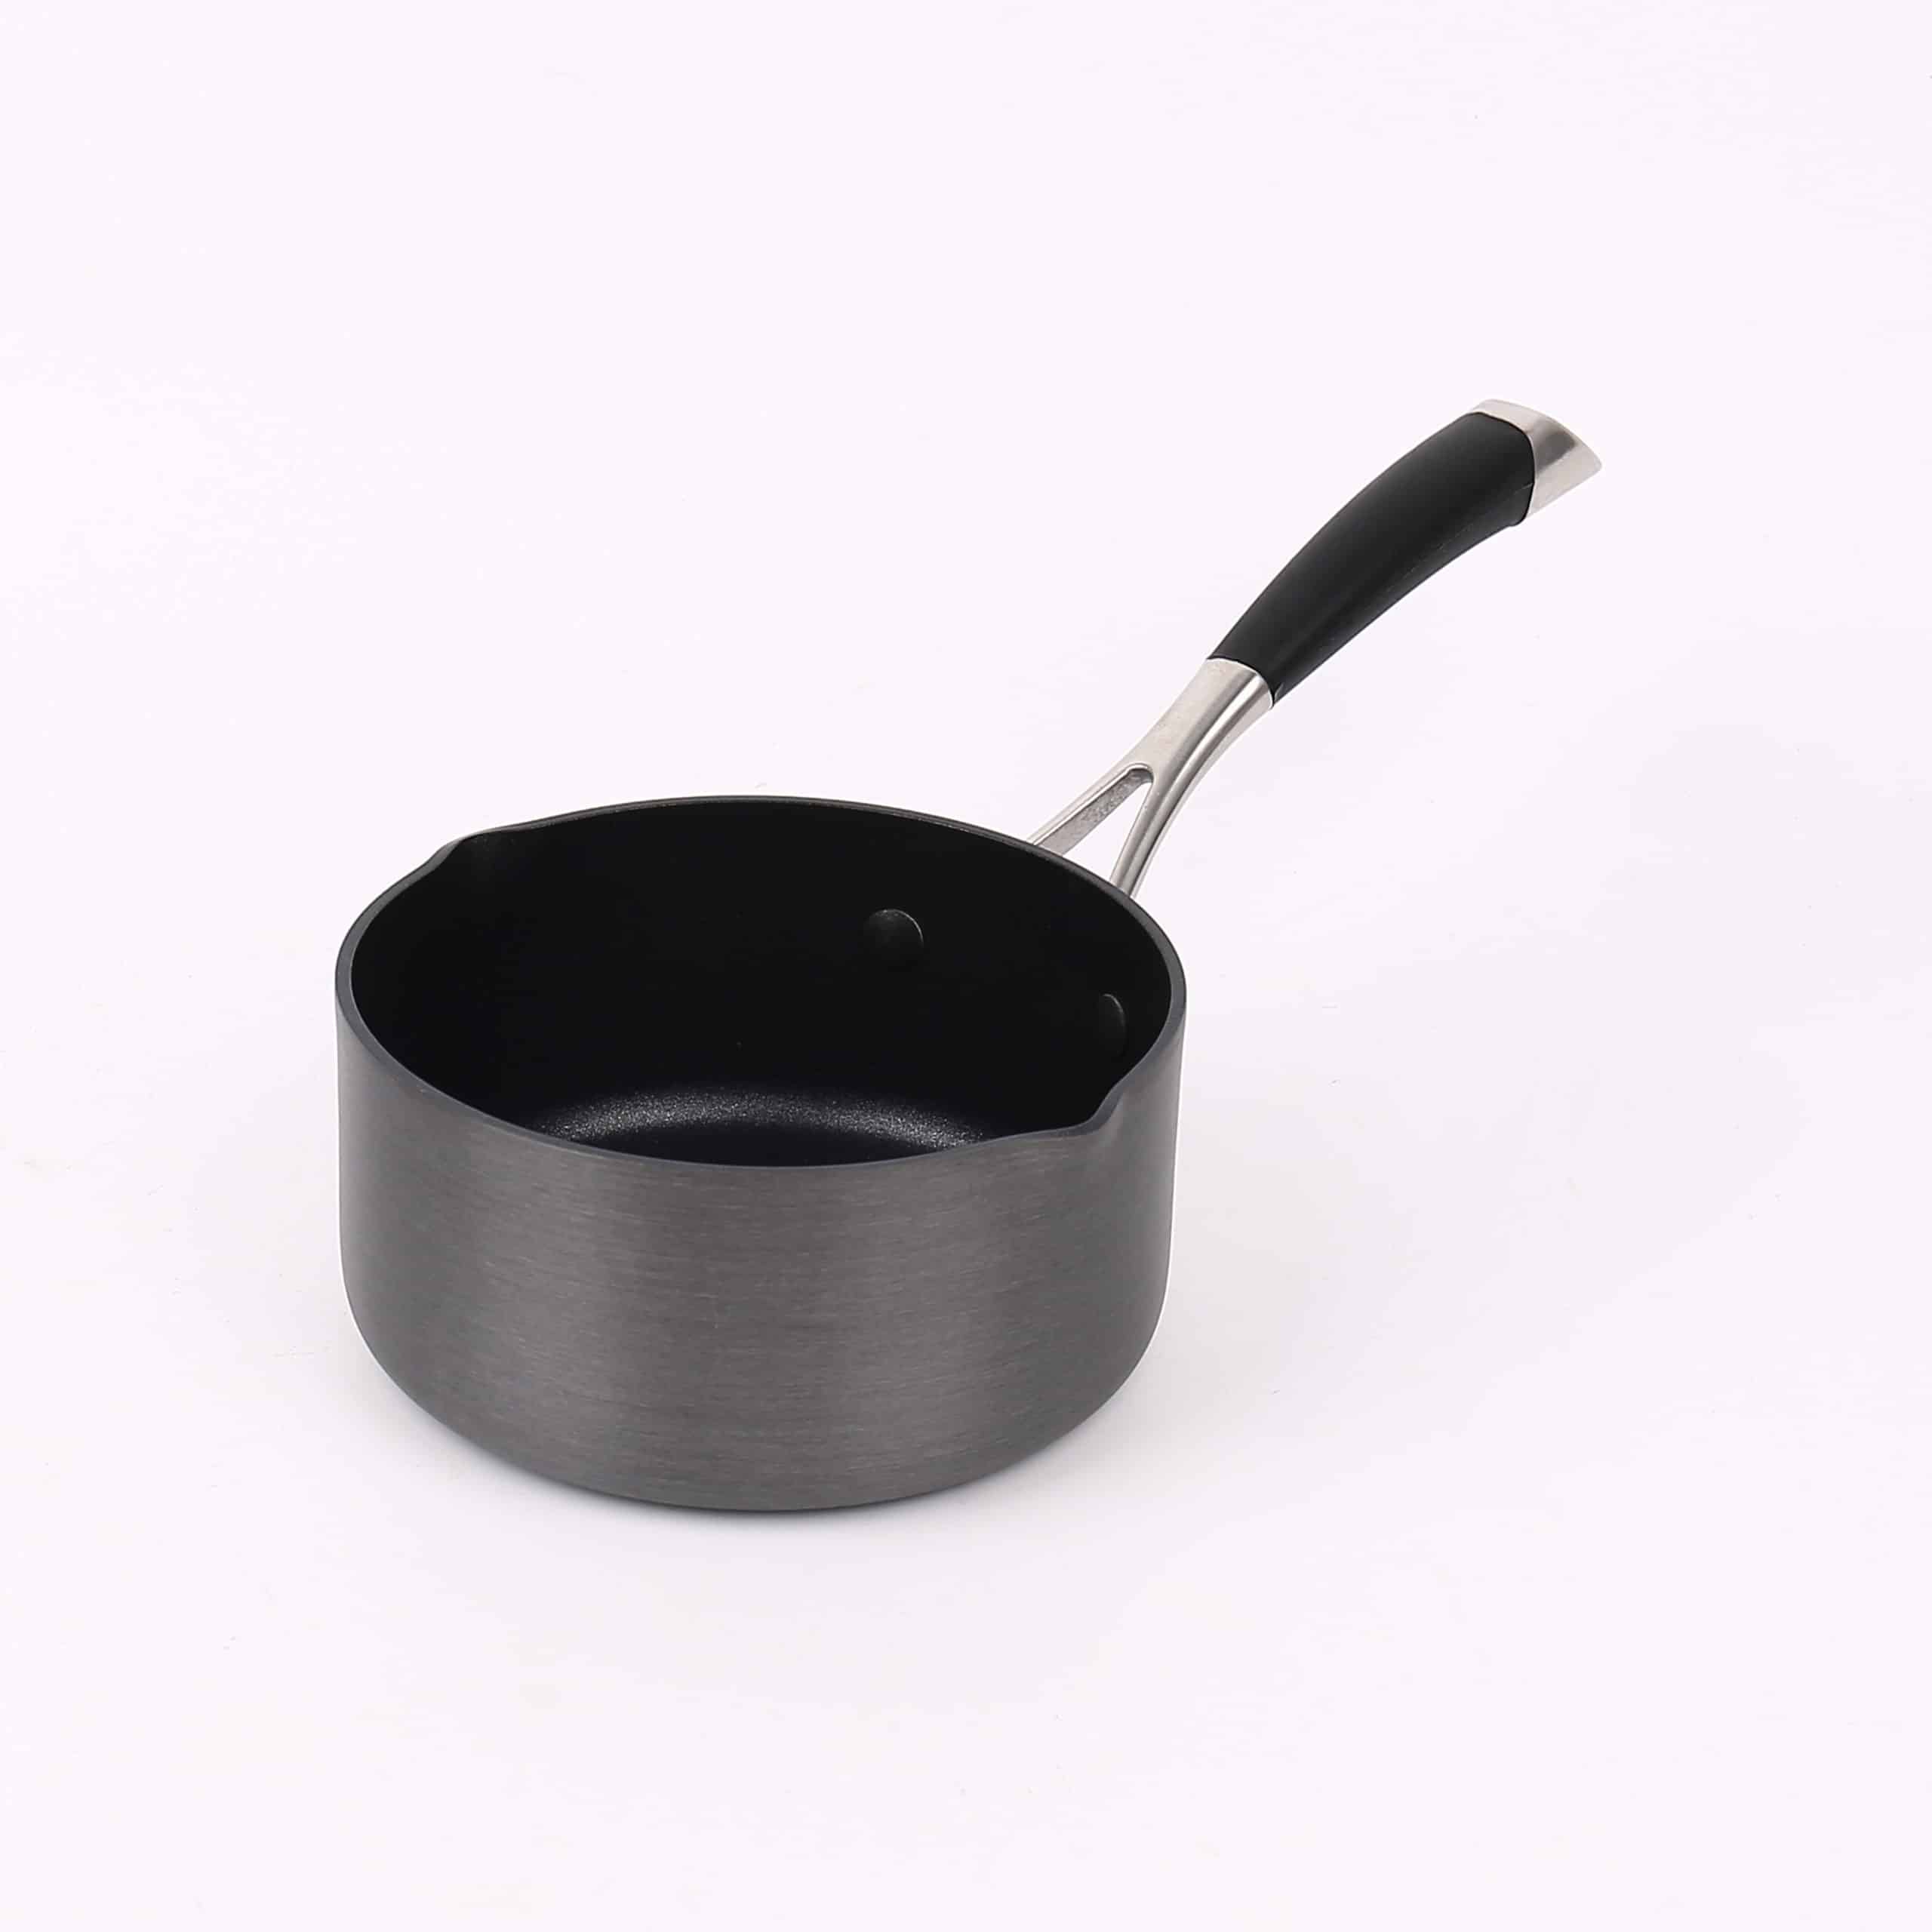 5 Pc. Hard Anodised Cookware Set